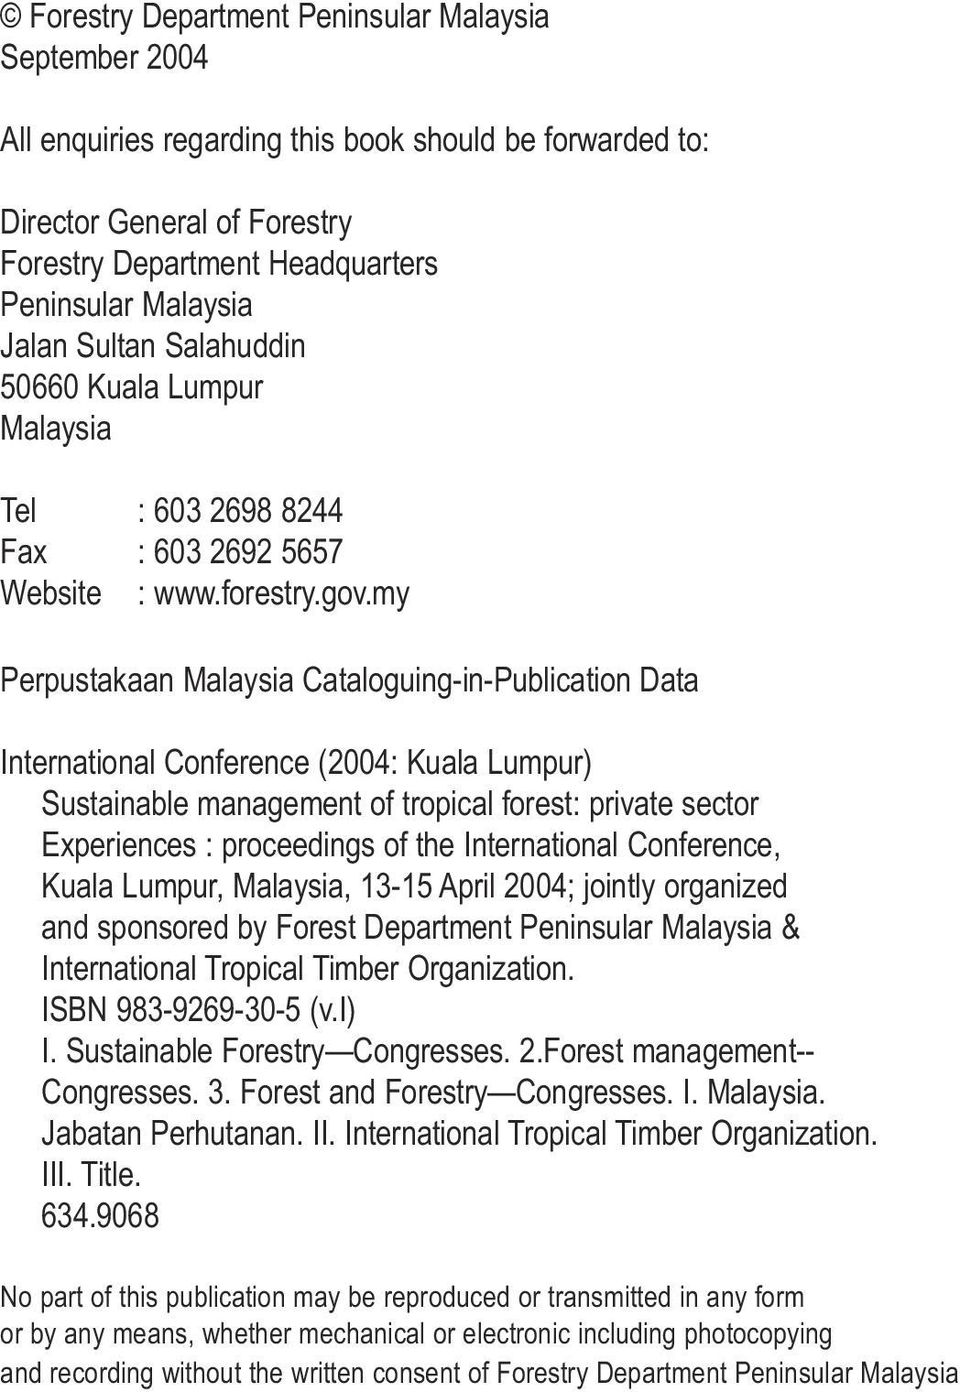 my Perpustakaan Malaysia Cataloguing-in-Publication Data International Conference (2004: Kuala Lumpur) Sustainable management of tropical forest: private sector Experiences : proceedings of the